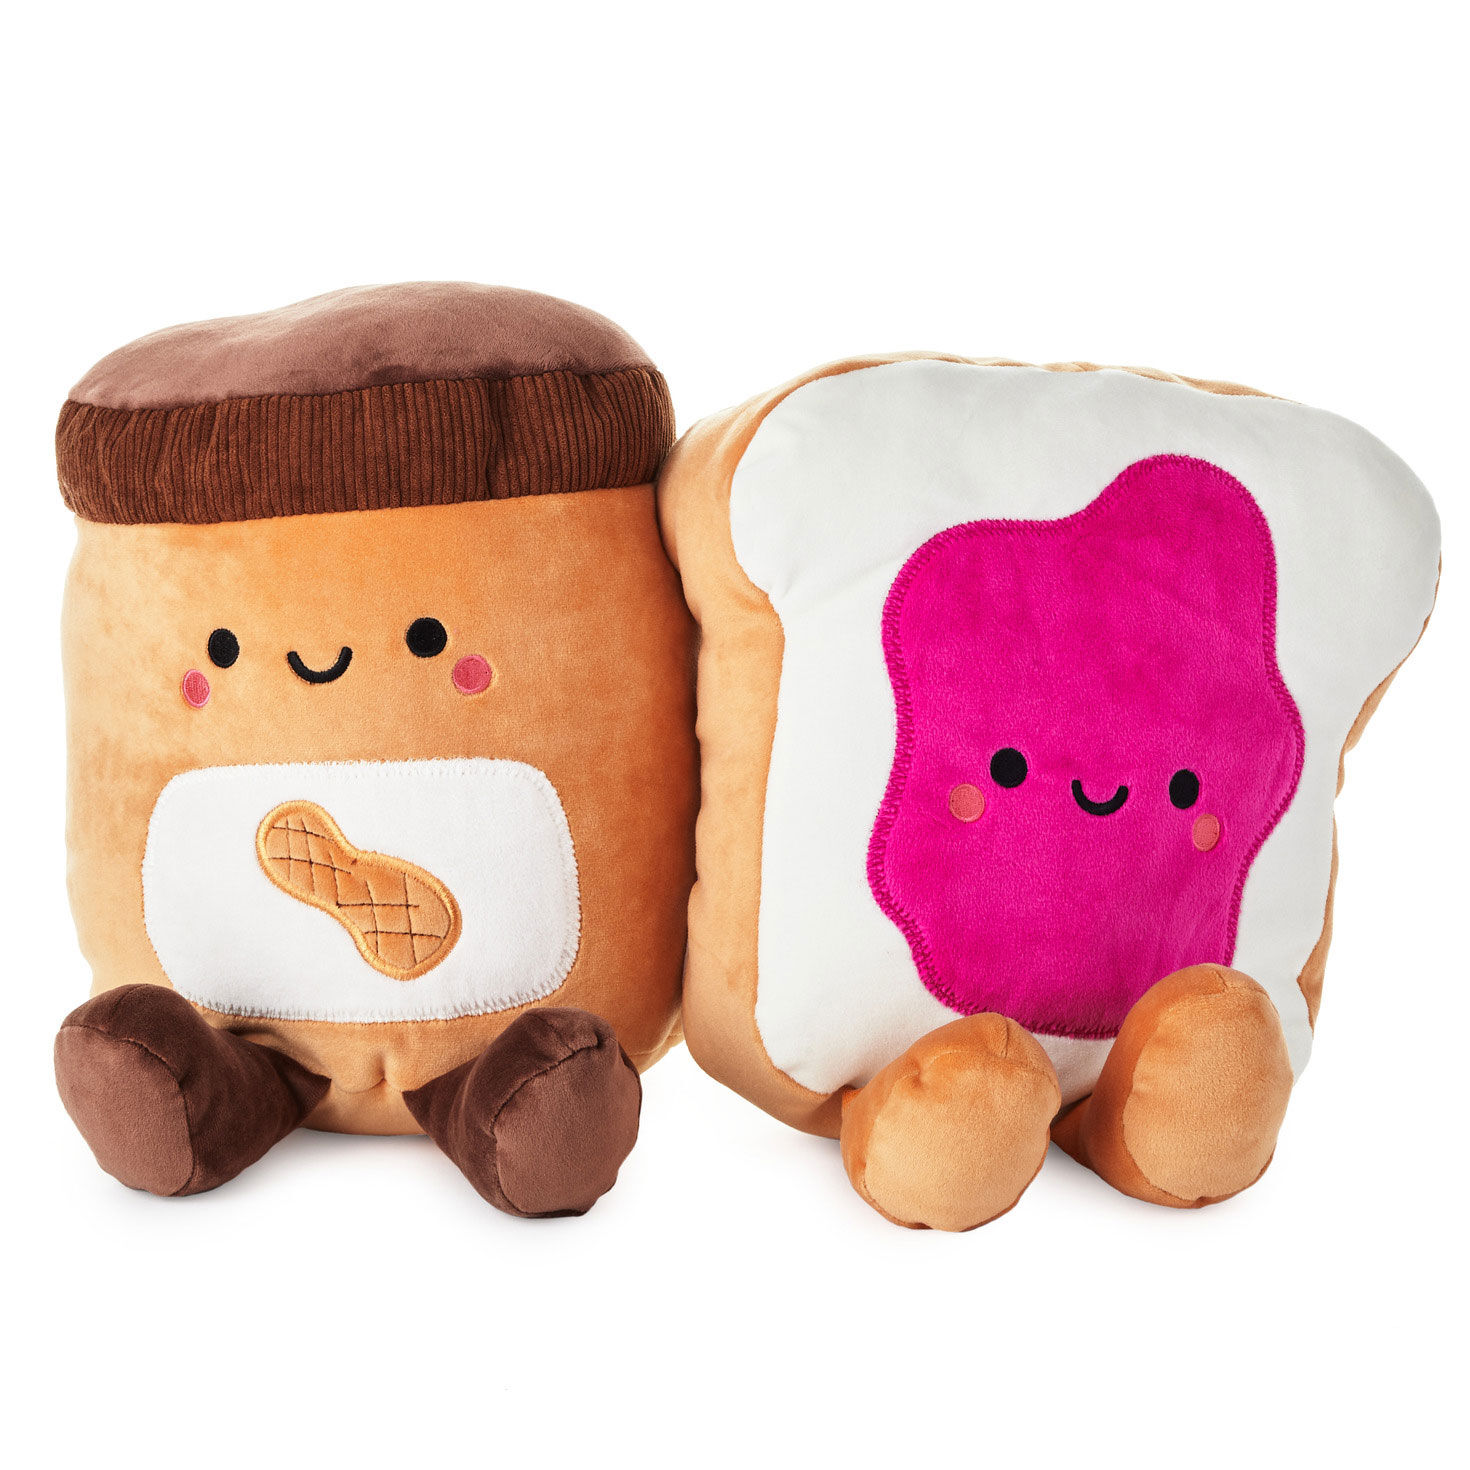 Large Better Together Peanut Butter and Jelly Magnetic Plush, 12" for only USD 39.99 | Hallmark